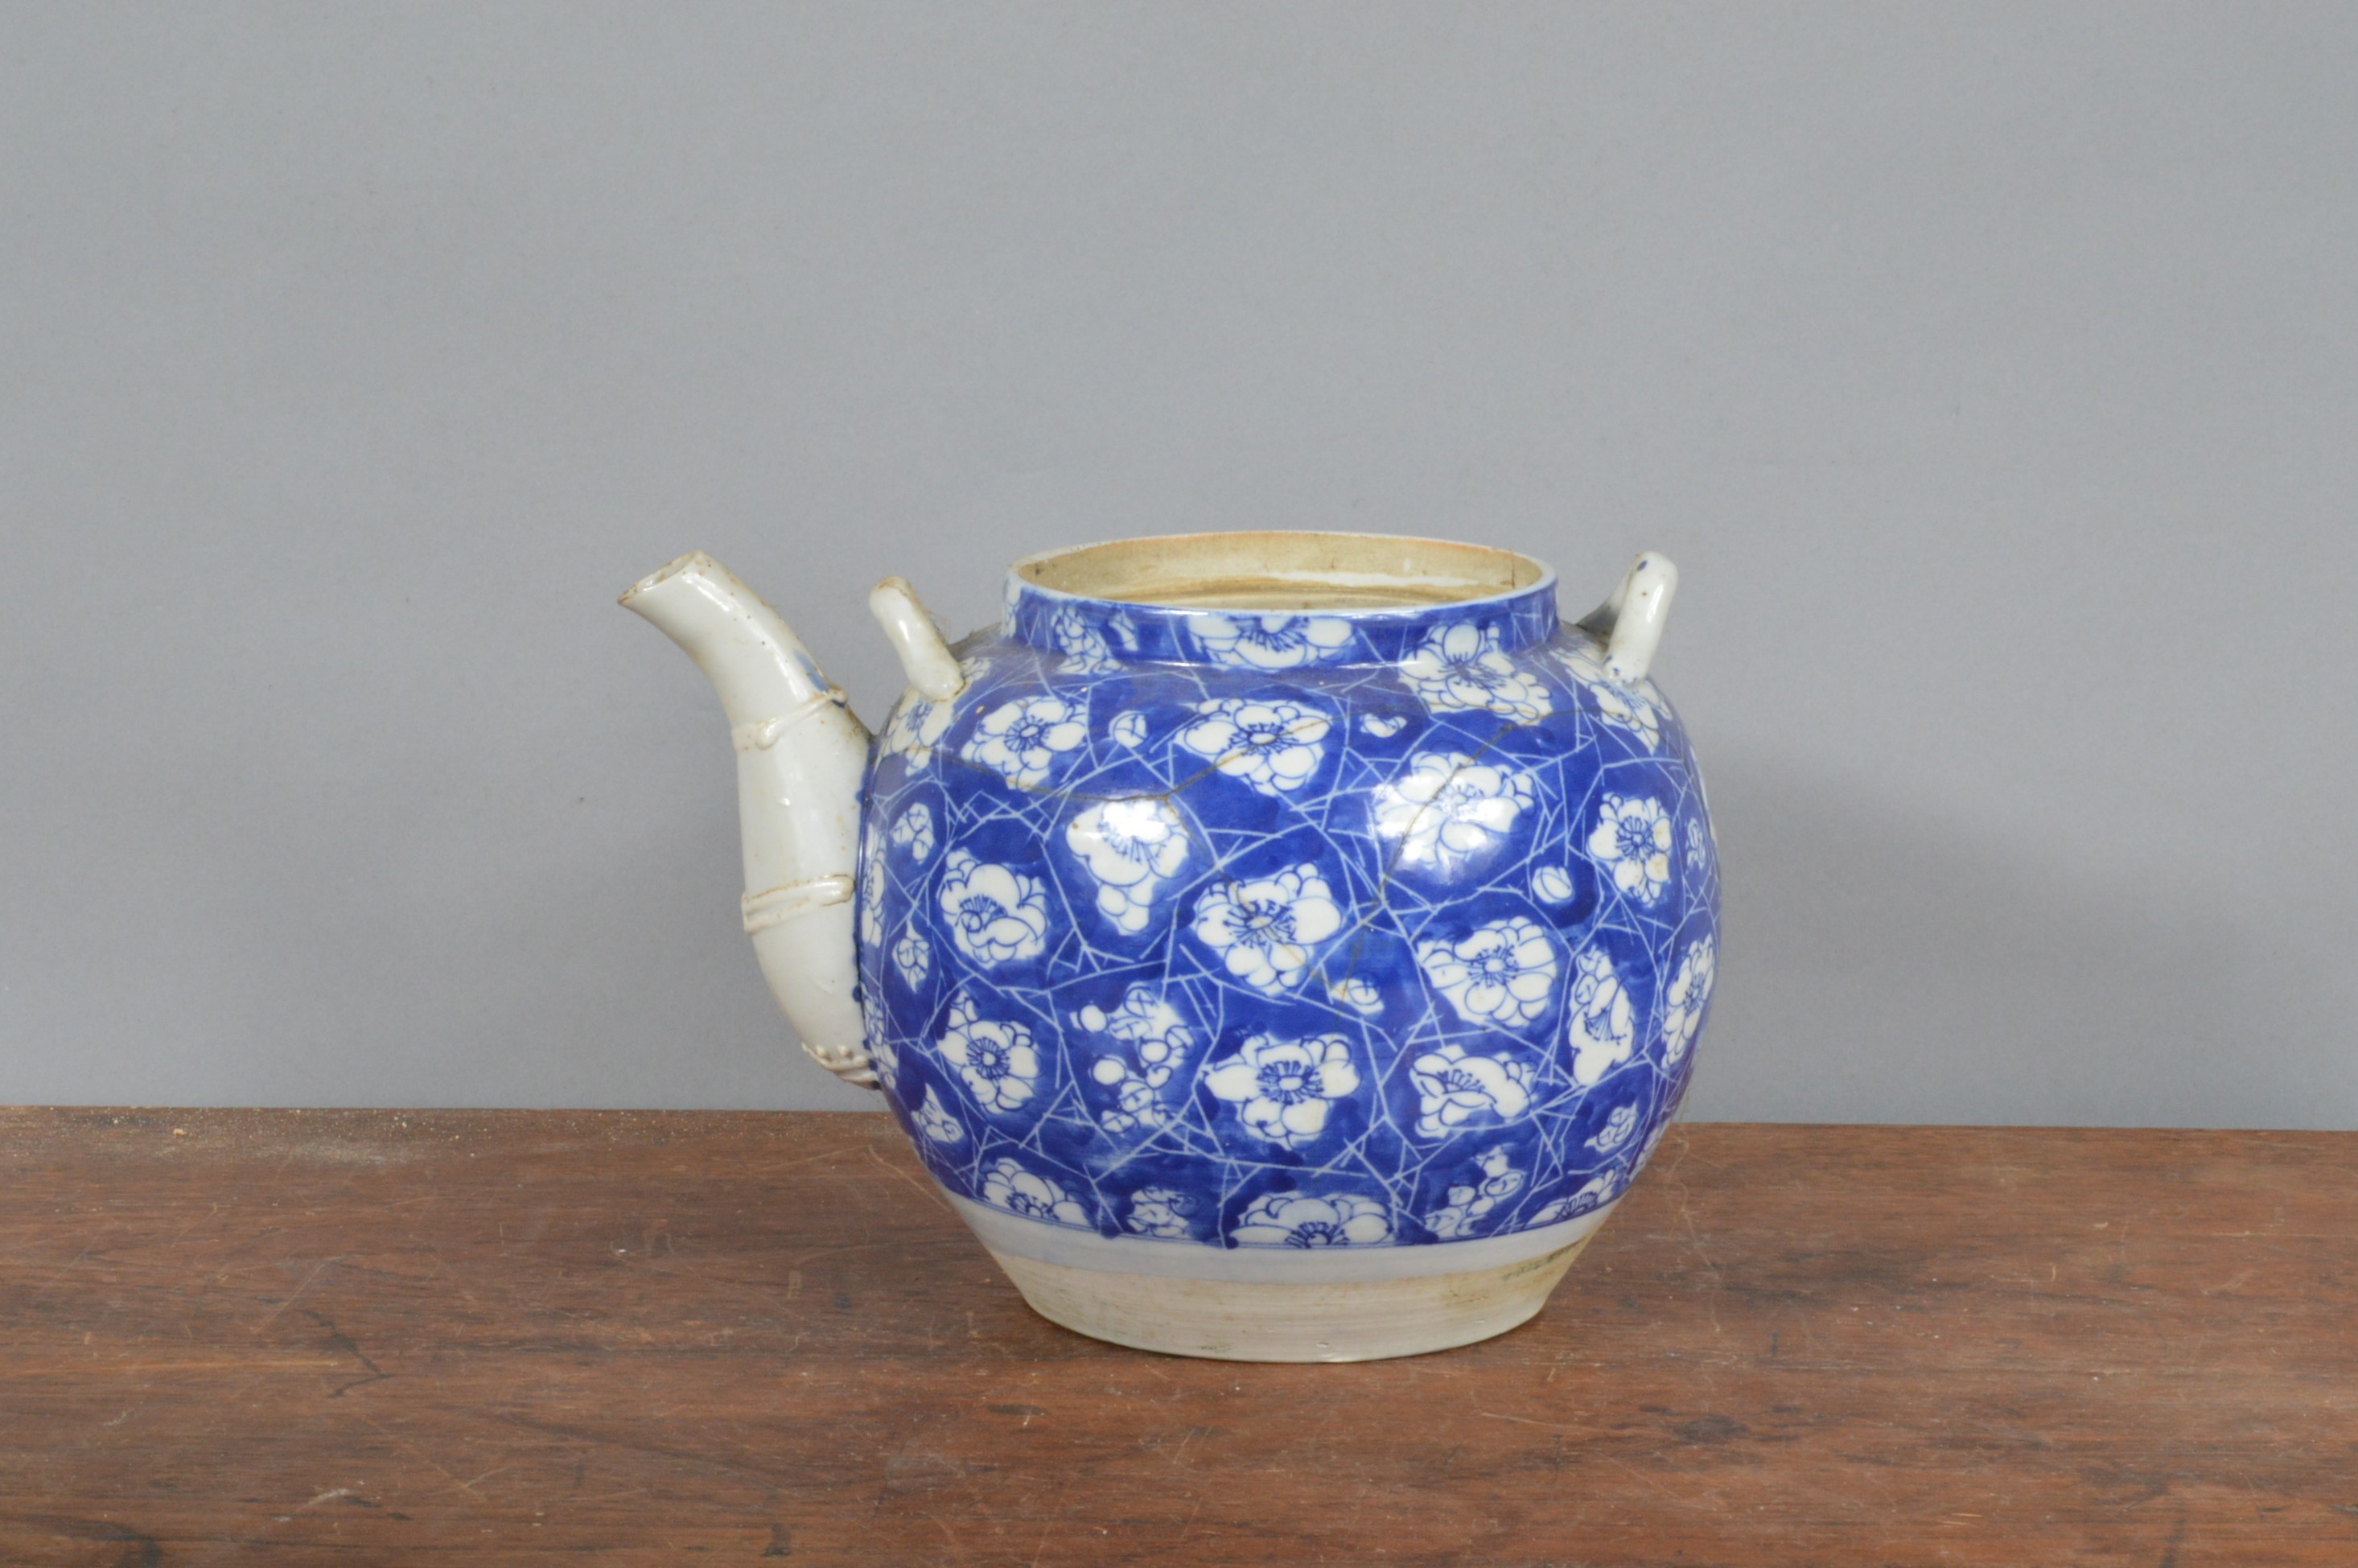 A 19th century Chinese hand-painted blue and white teapot, decorated with cracked ice and prunus.